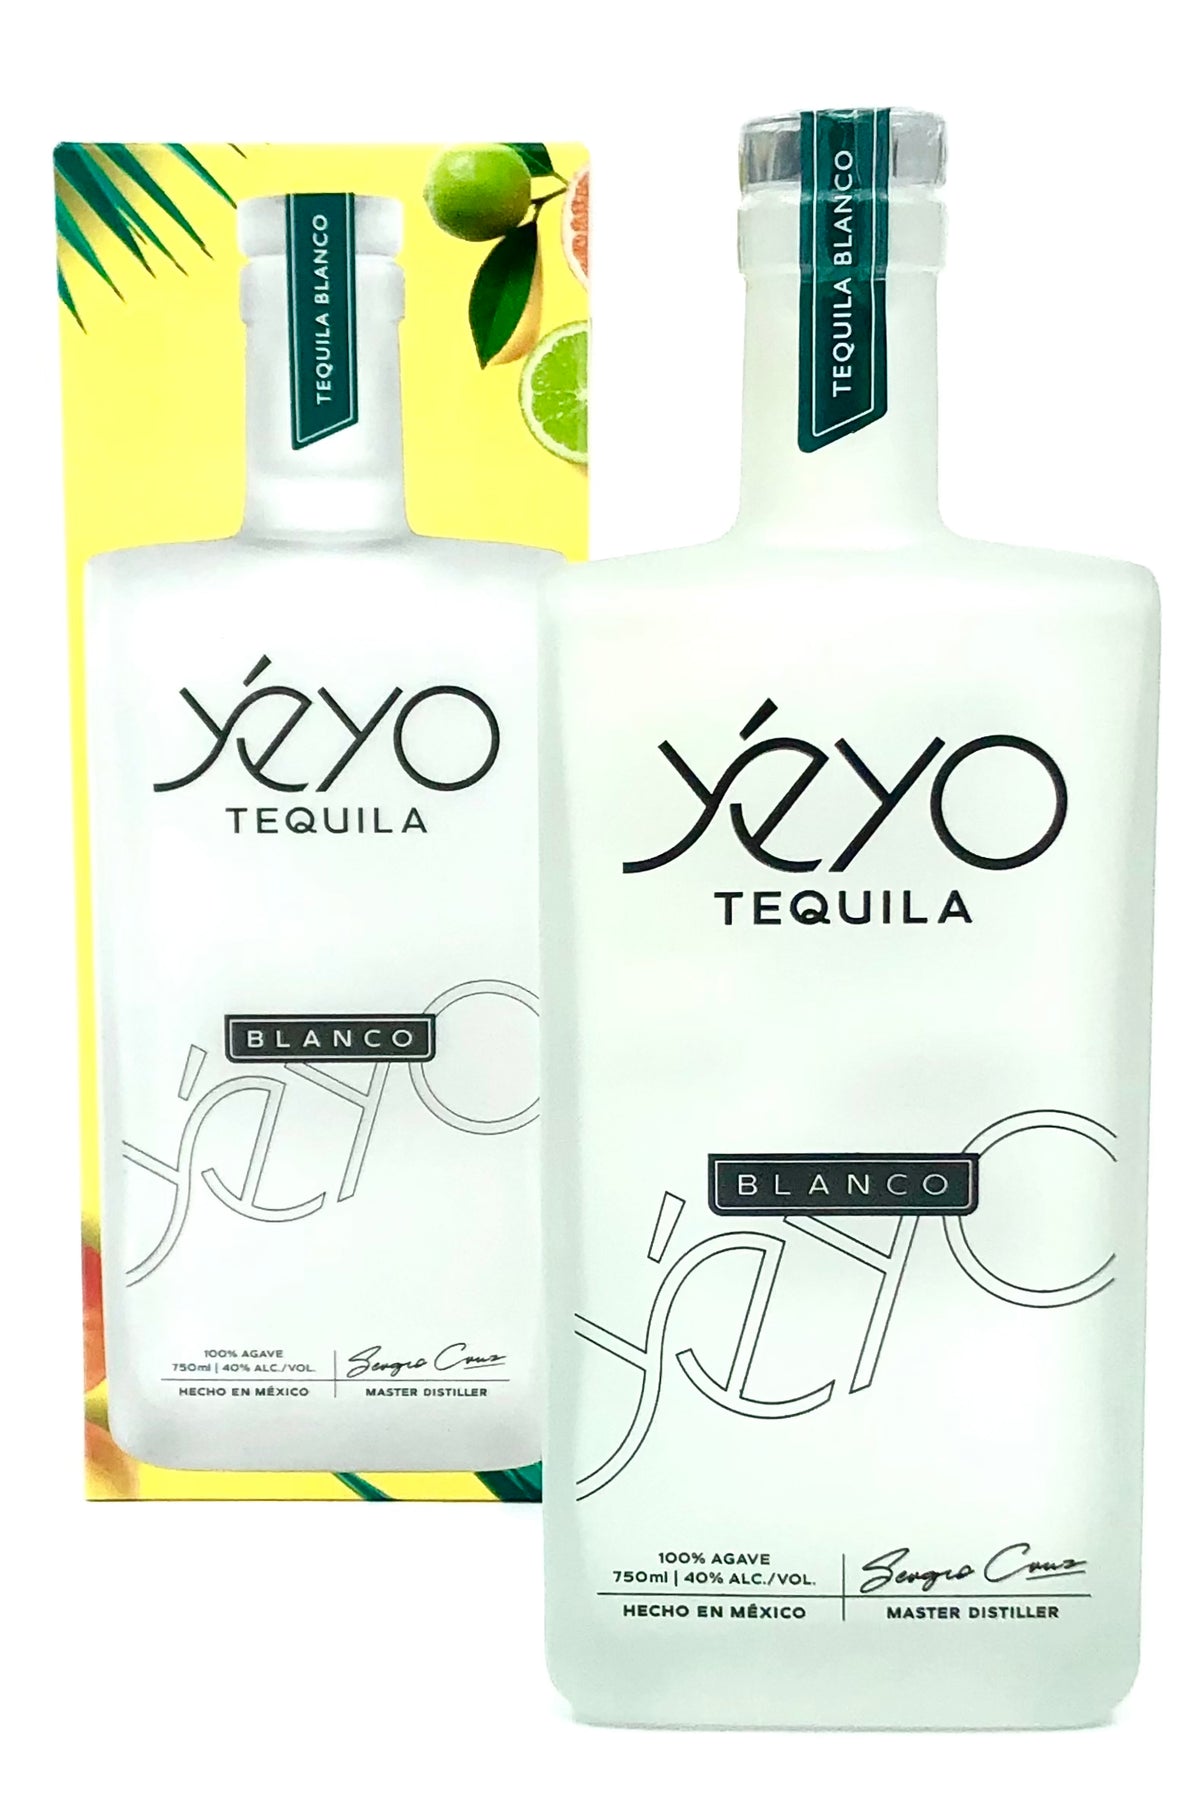 Yeyo Tequila Silver